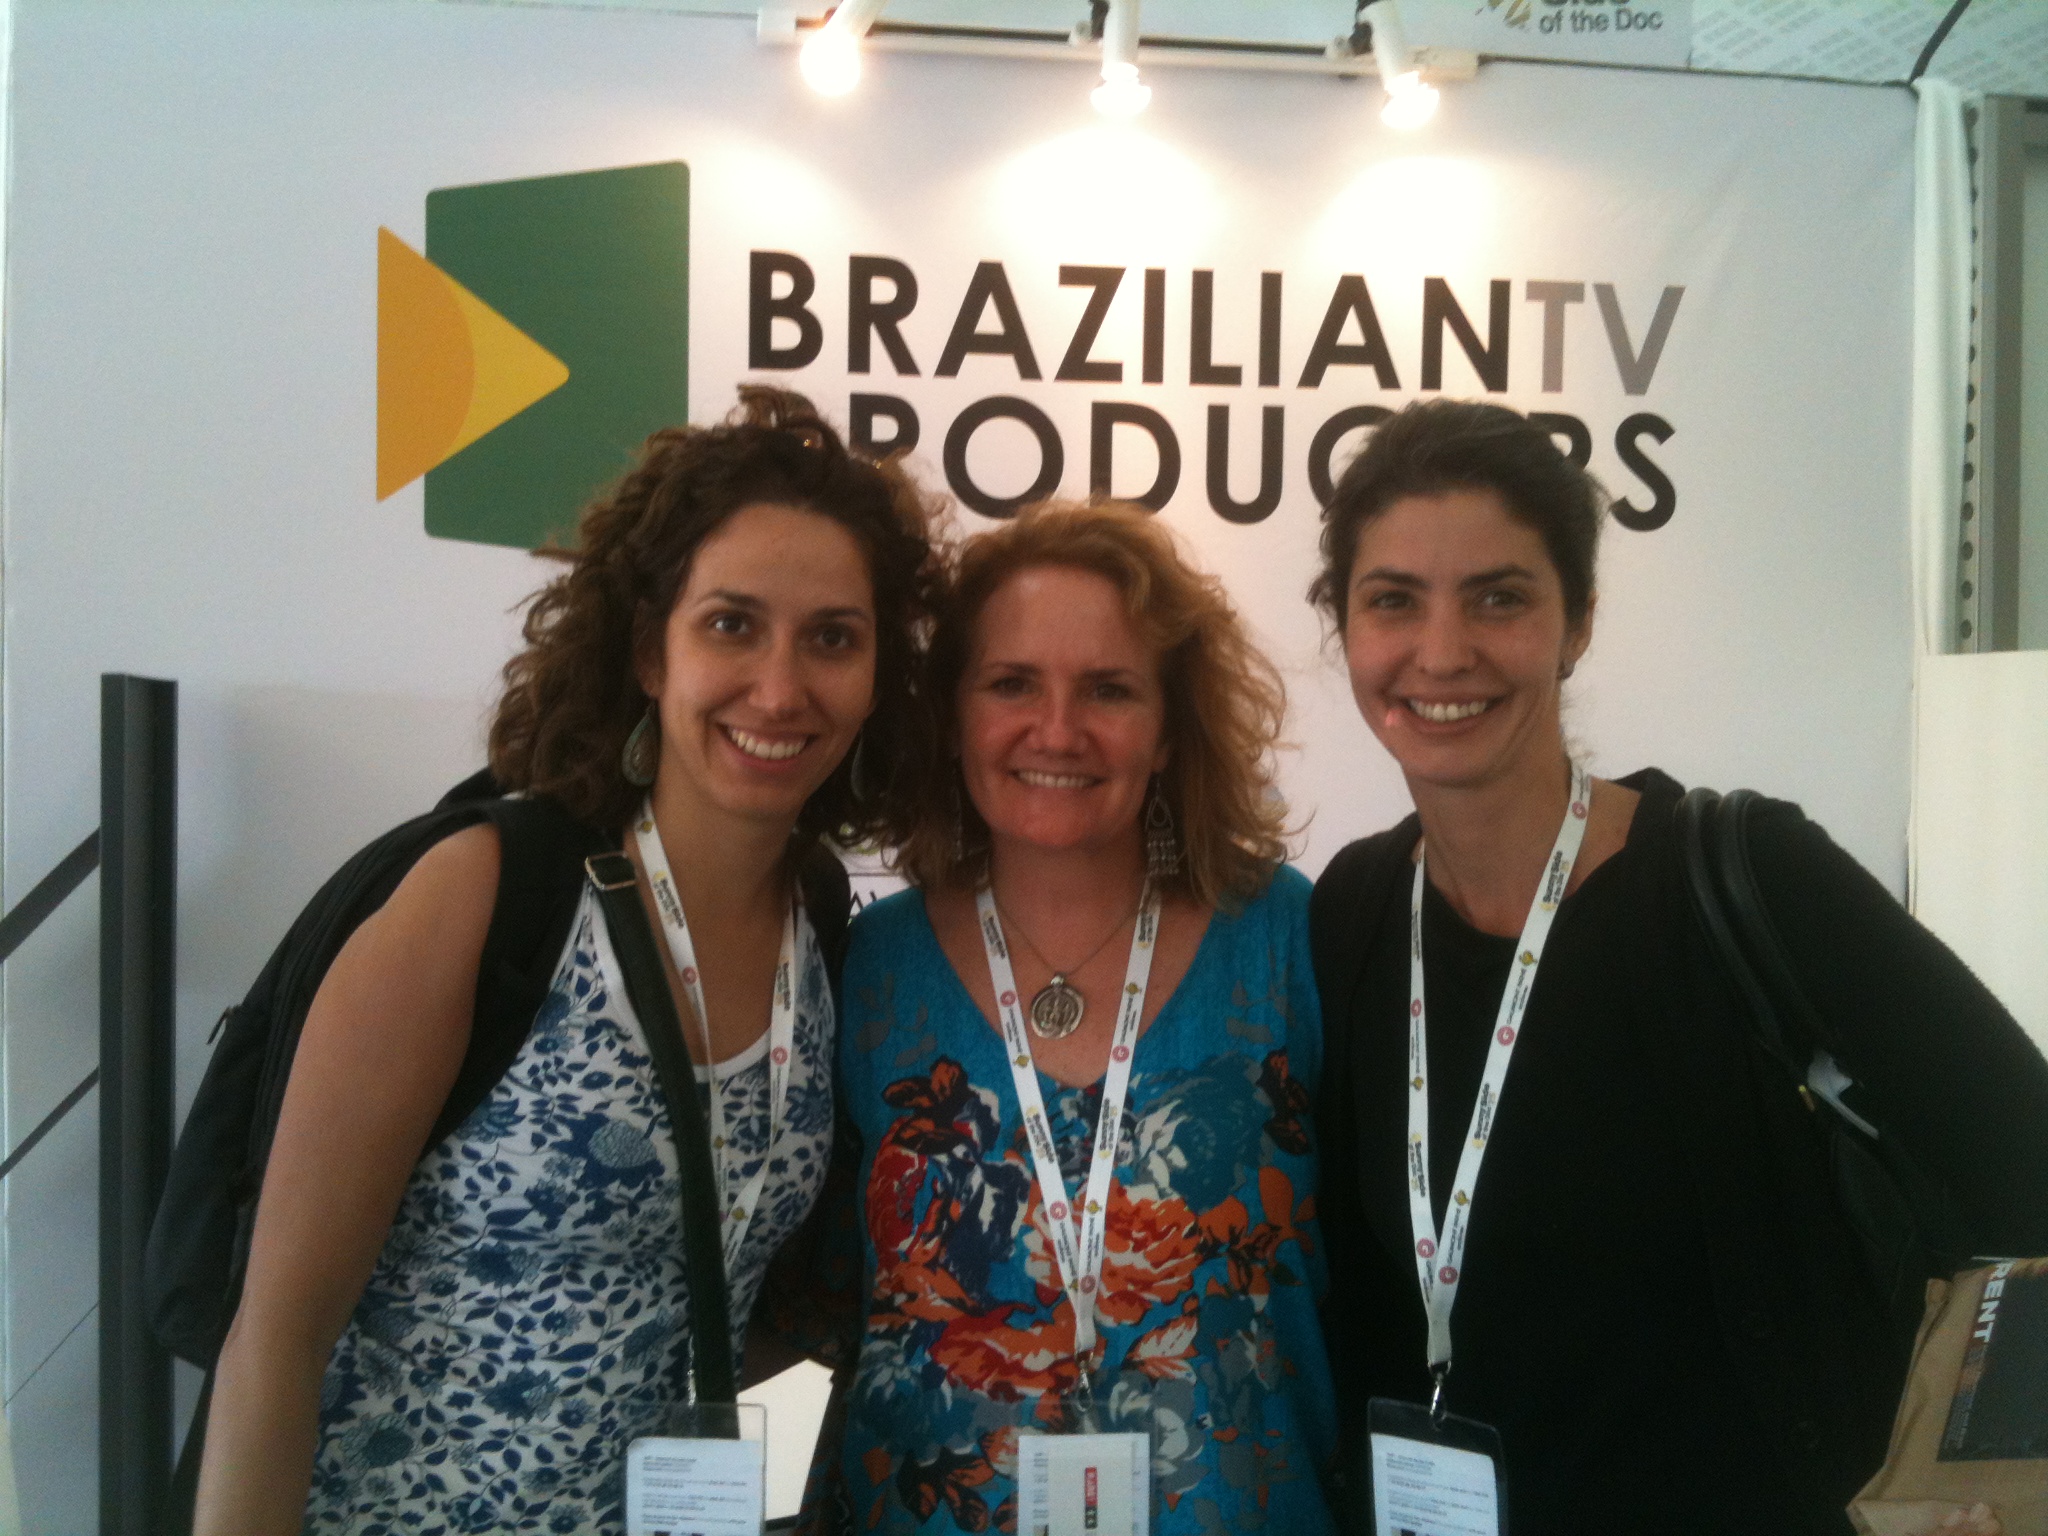 At Sunnyside of the Doc, 2014 with Association of Brazilian Independent TV Producers